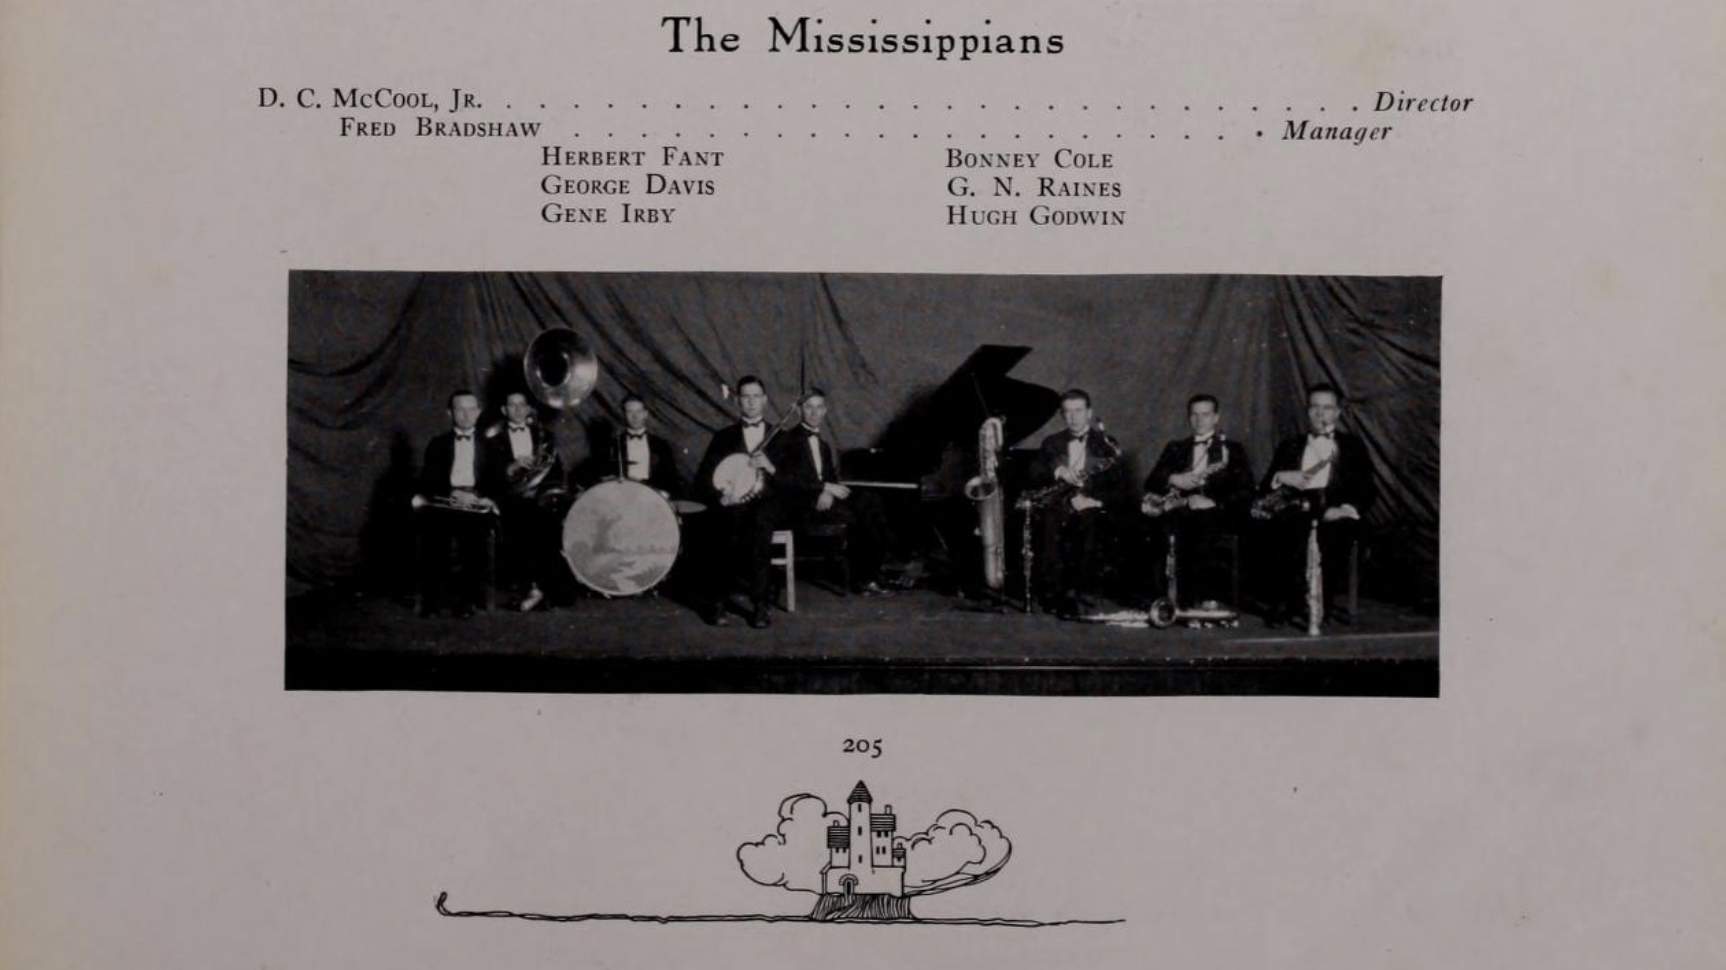 The university’s jazz band adopted the name The Mississippians Jazz Ensemble in 1927 and appeared in that year’s Ole Miss yearbook.